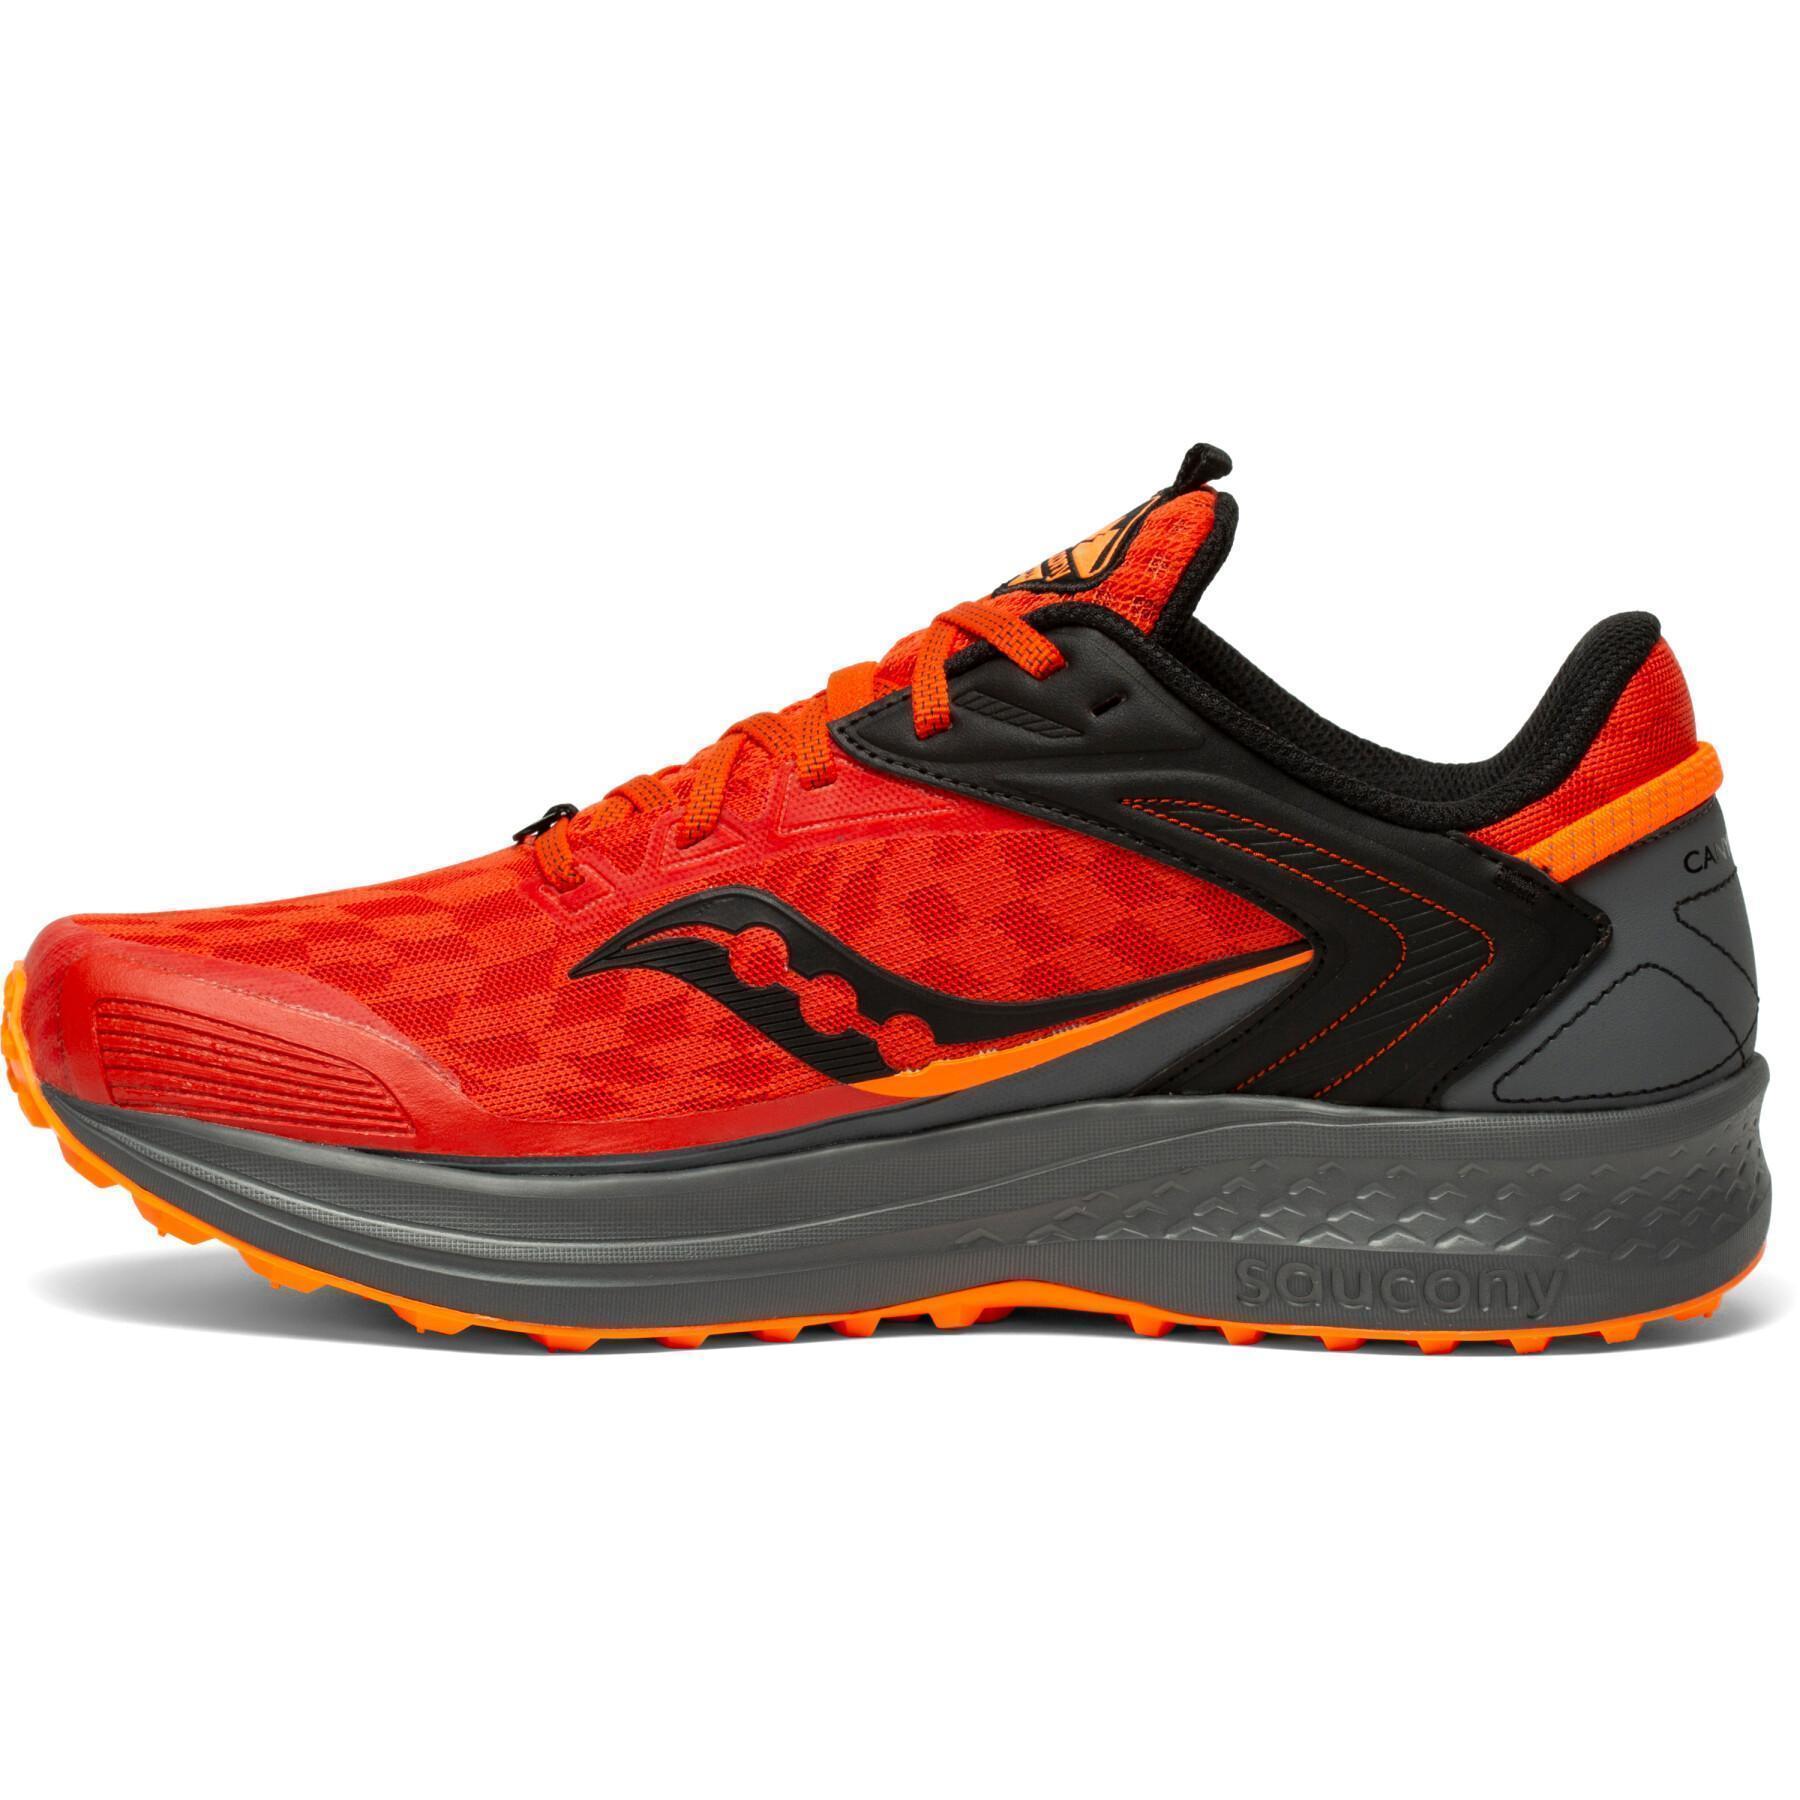 Shoes Saucony canyon tr2